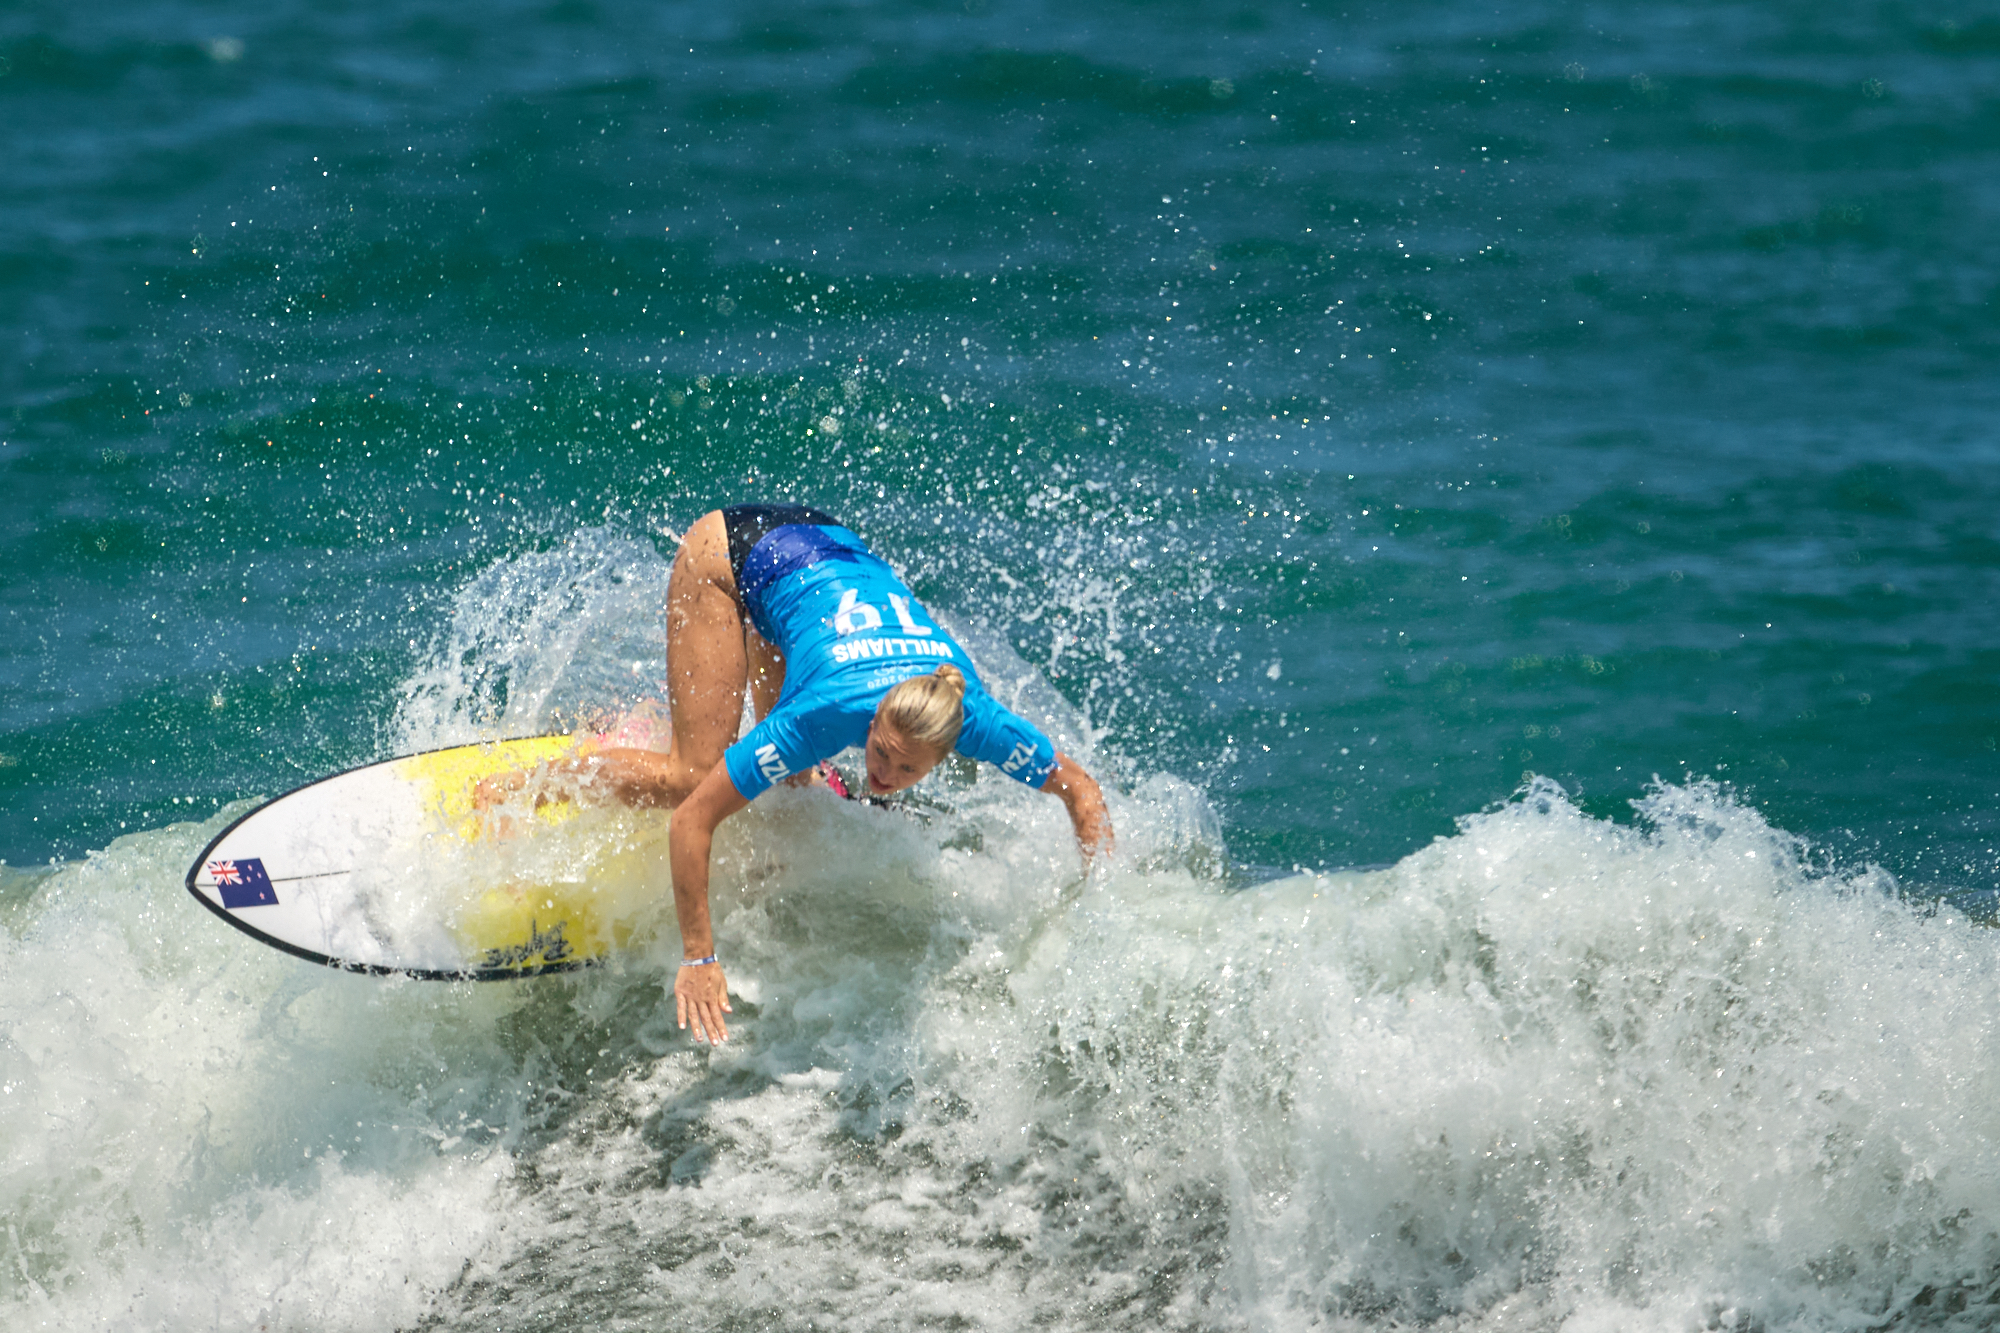 Photograph of Ella Williams of New Zealand during the women's surfing competition at Tsurigasaki Surfing Beach at the Tokyo 2020 Olympics.